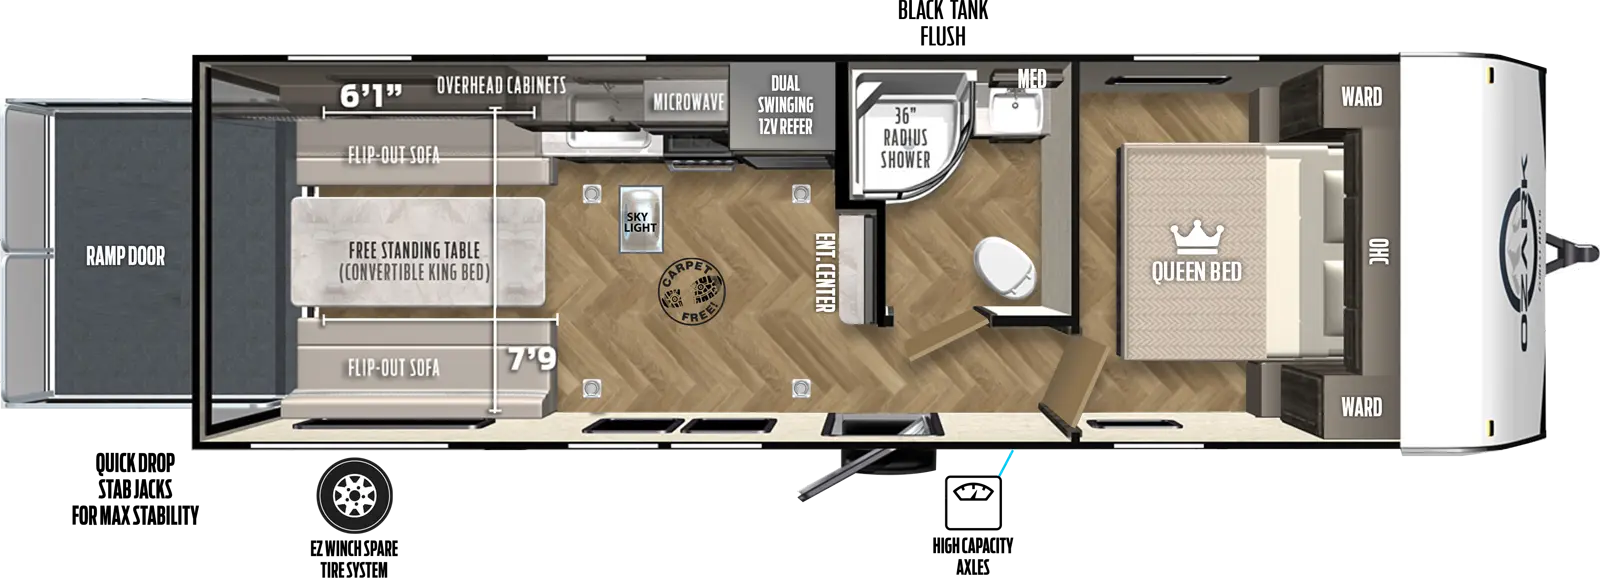 The Ozark 2500TH is a toy hauler model with one side entry door, pass-through storage, LP quick connect, spray port, exterior shower, black tank flush, and 15' awning on the exterior. Inside, there is a 60" x 74" queen bed in the front of the unit, with wardrobe cabinets and room to stand on either side of the bed and overhead cabinets mounted above. The bedroom door leads into a short hallway that opens into the main living area. The bathroom is located on the right side of the hallway and contains a corner radius shower with skylight, sink and medicine cabinet, and commode. There is a TV mounted on the outside of the far bathroom wall, situated perpendicular to the length of the unit and facing the rear wall. The kitchen area is on the right and contains an 11 cubic foot refrigerator, stovetop and oven, and sink, with cabinets and a microwave mounted overhead. In the rear is a removable table with a 30" x 72" sofa sleeper on either side.When these are moved out of the way, the remaining space functions as a 156" long, 84" high garage.